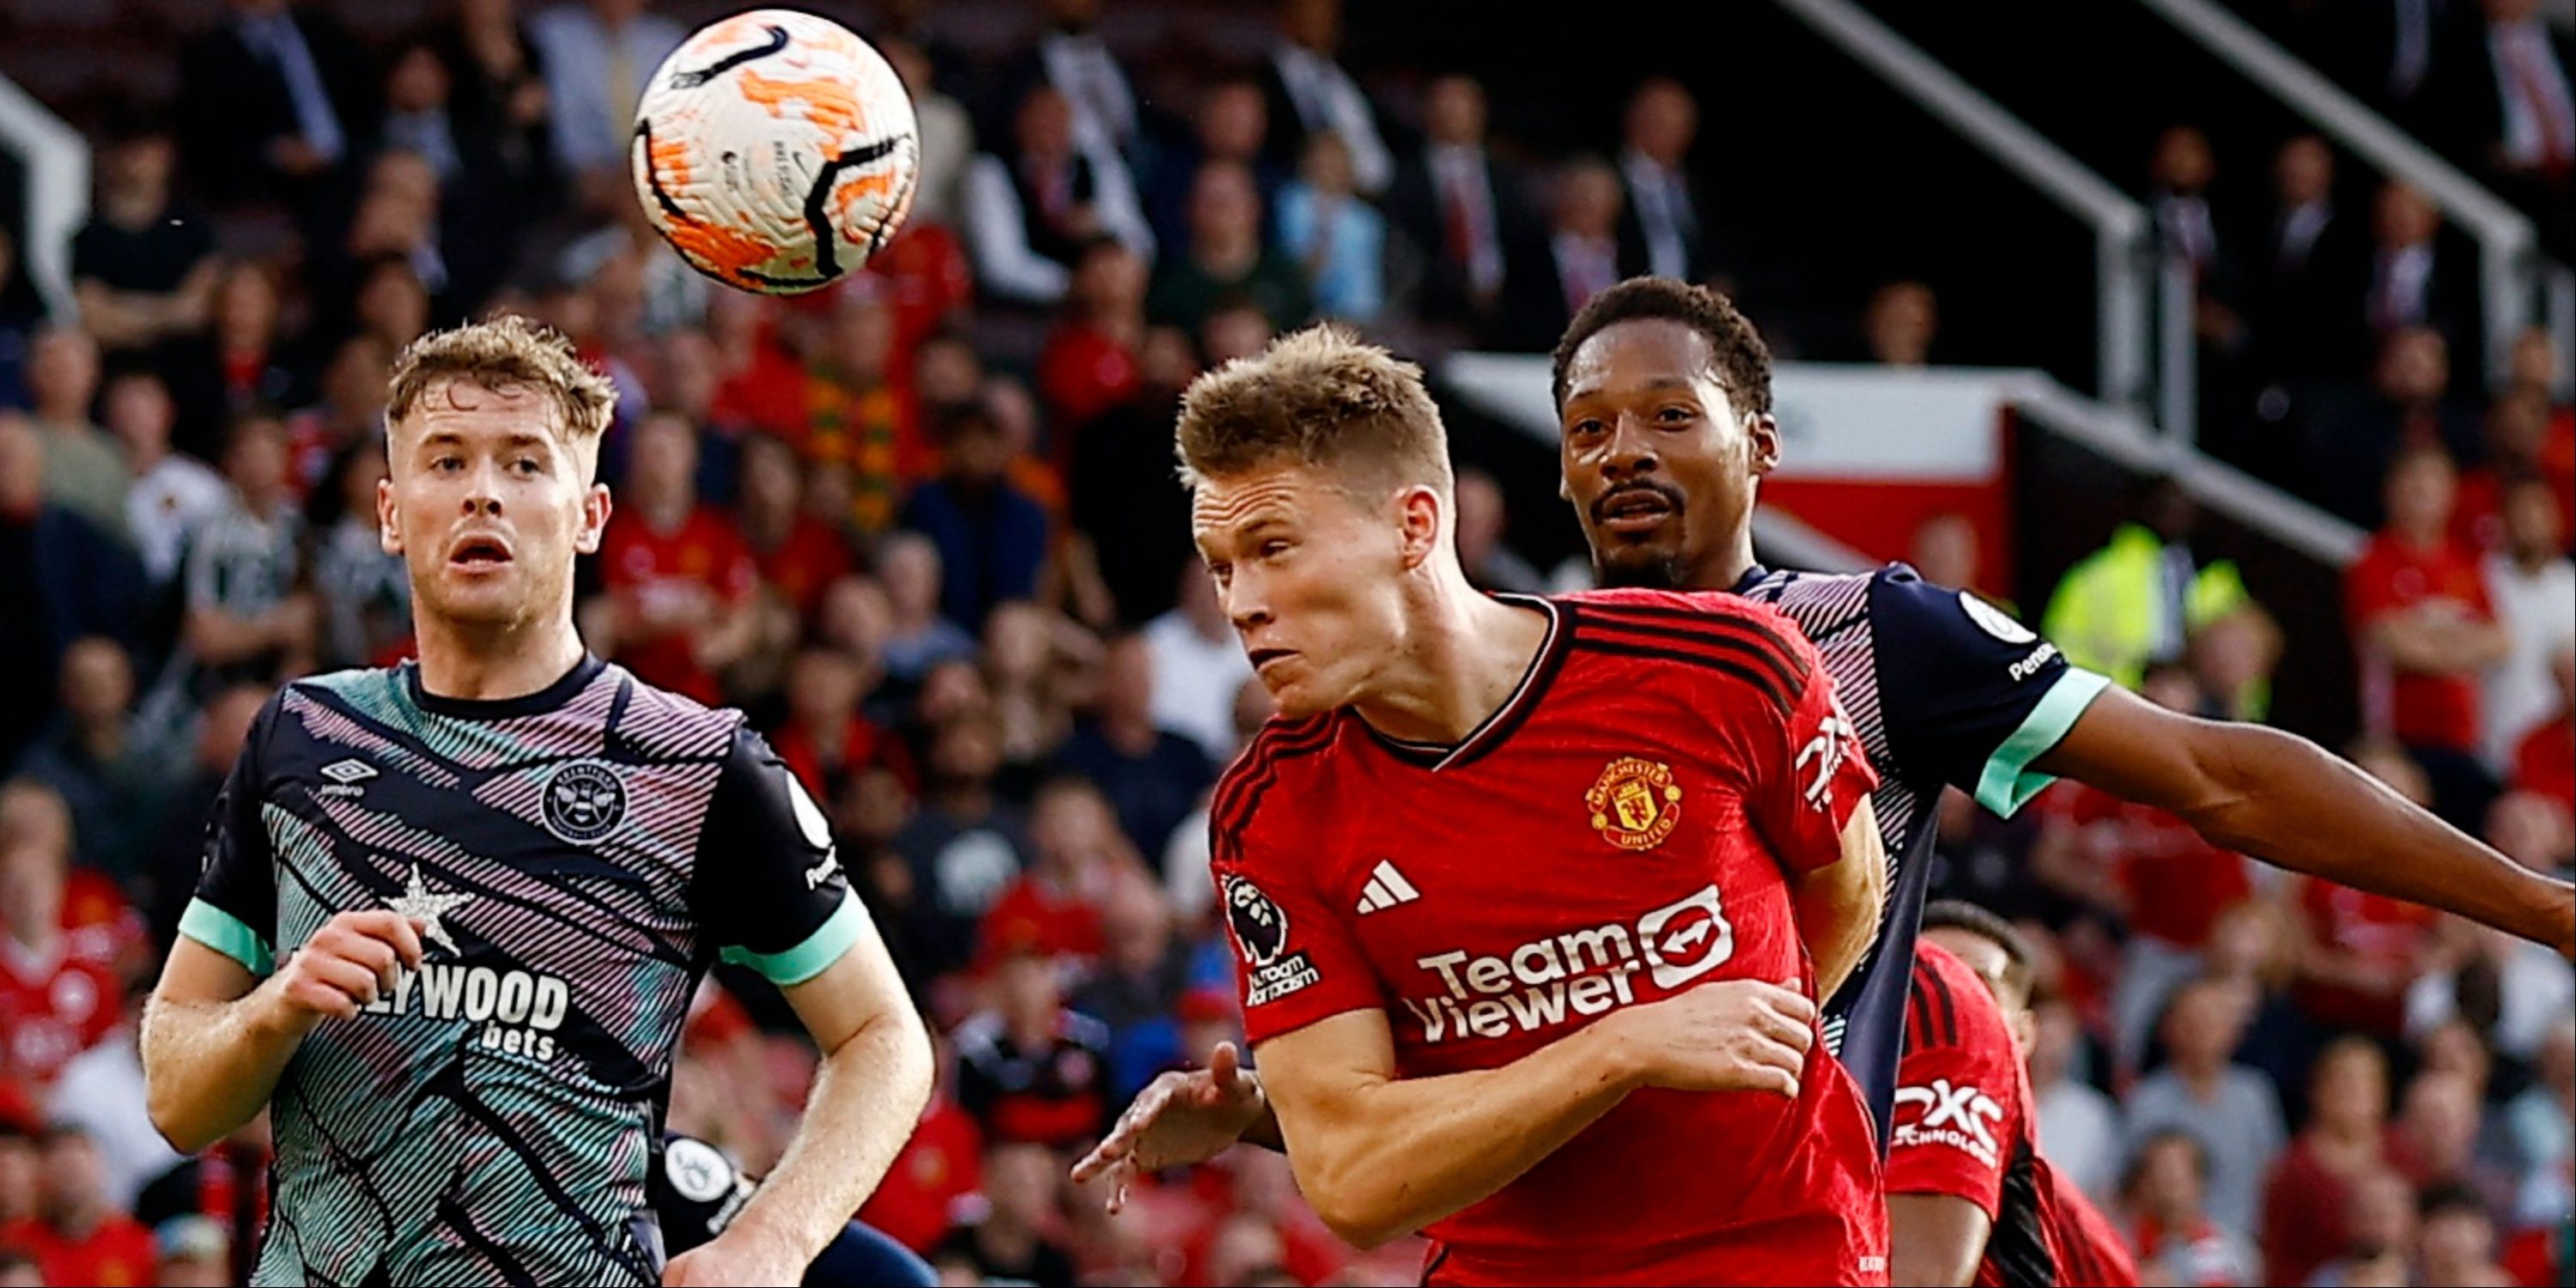 Manchester United's Scott McTominay scores their second goal